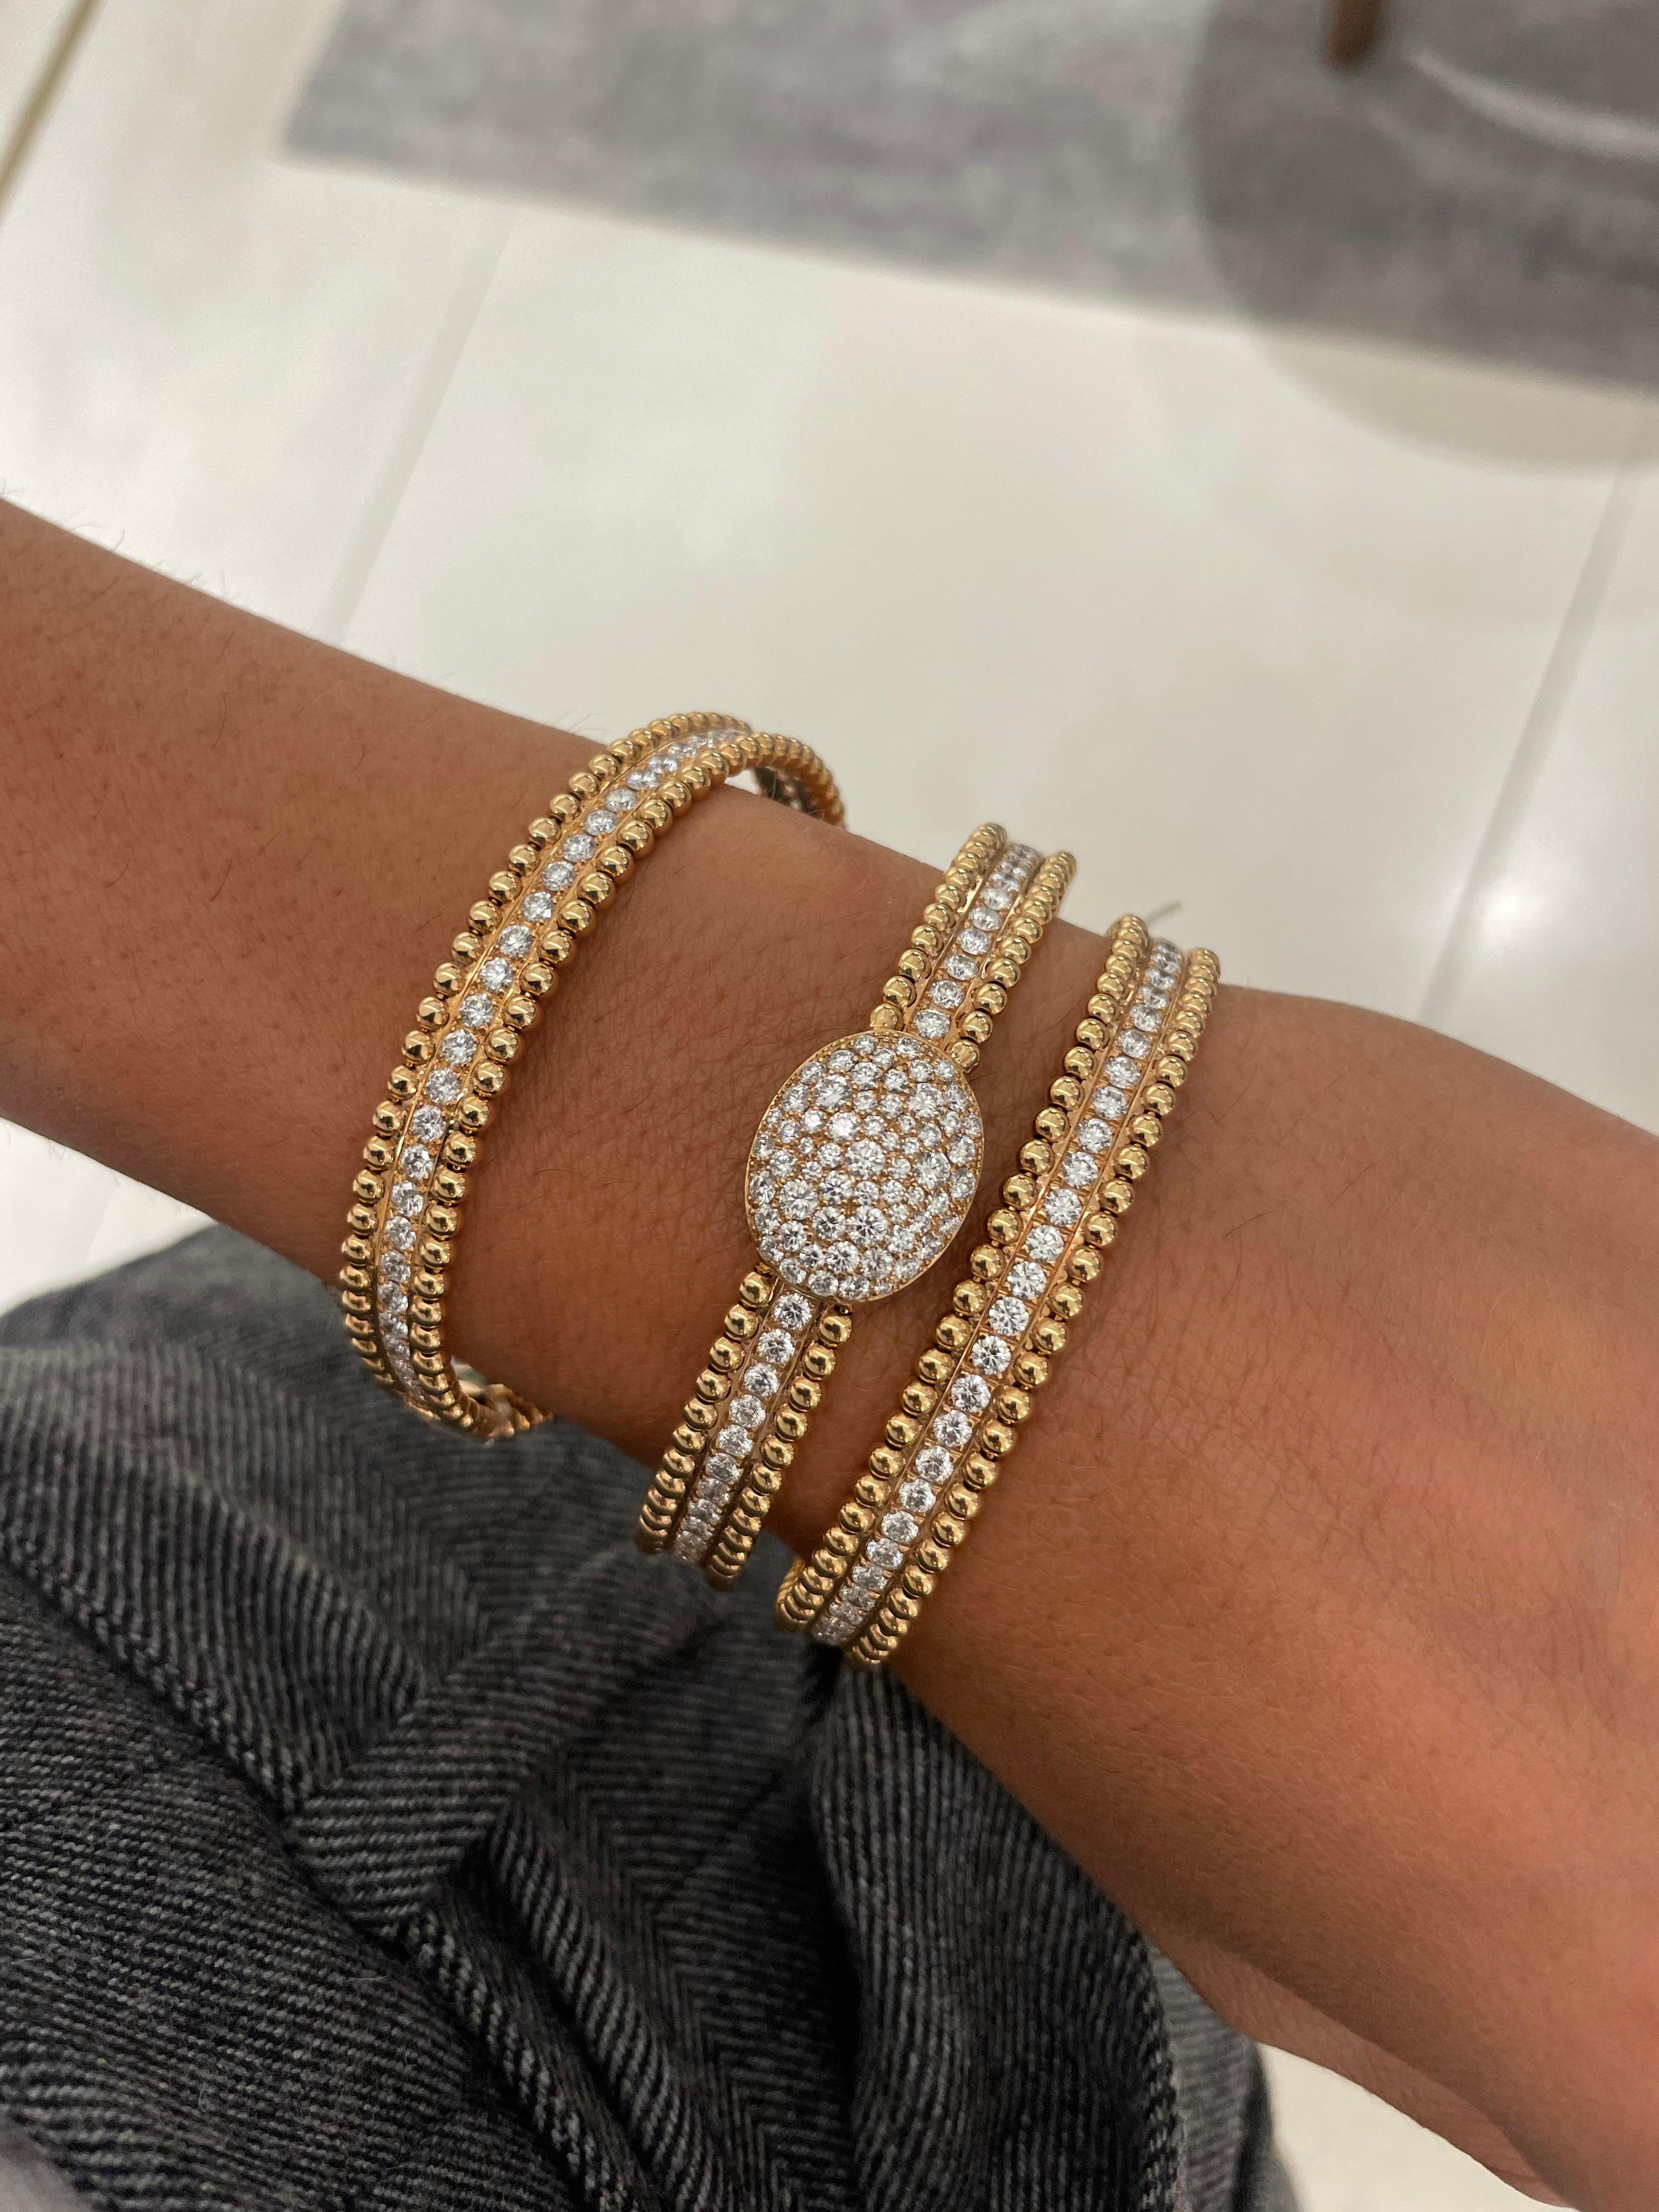 A very classic and easy to wear 18 karat rose gold bracelet. The bracelet is designed with a center row of round brilliant diamonds, with a total weight of 1.85 carats. The bracelet is finished with a beaded edge. It has a hinge on one side which